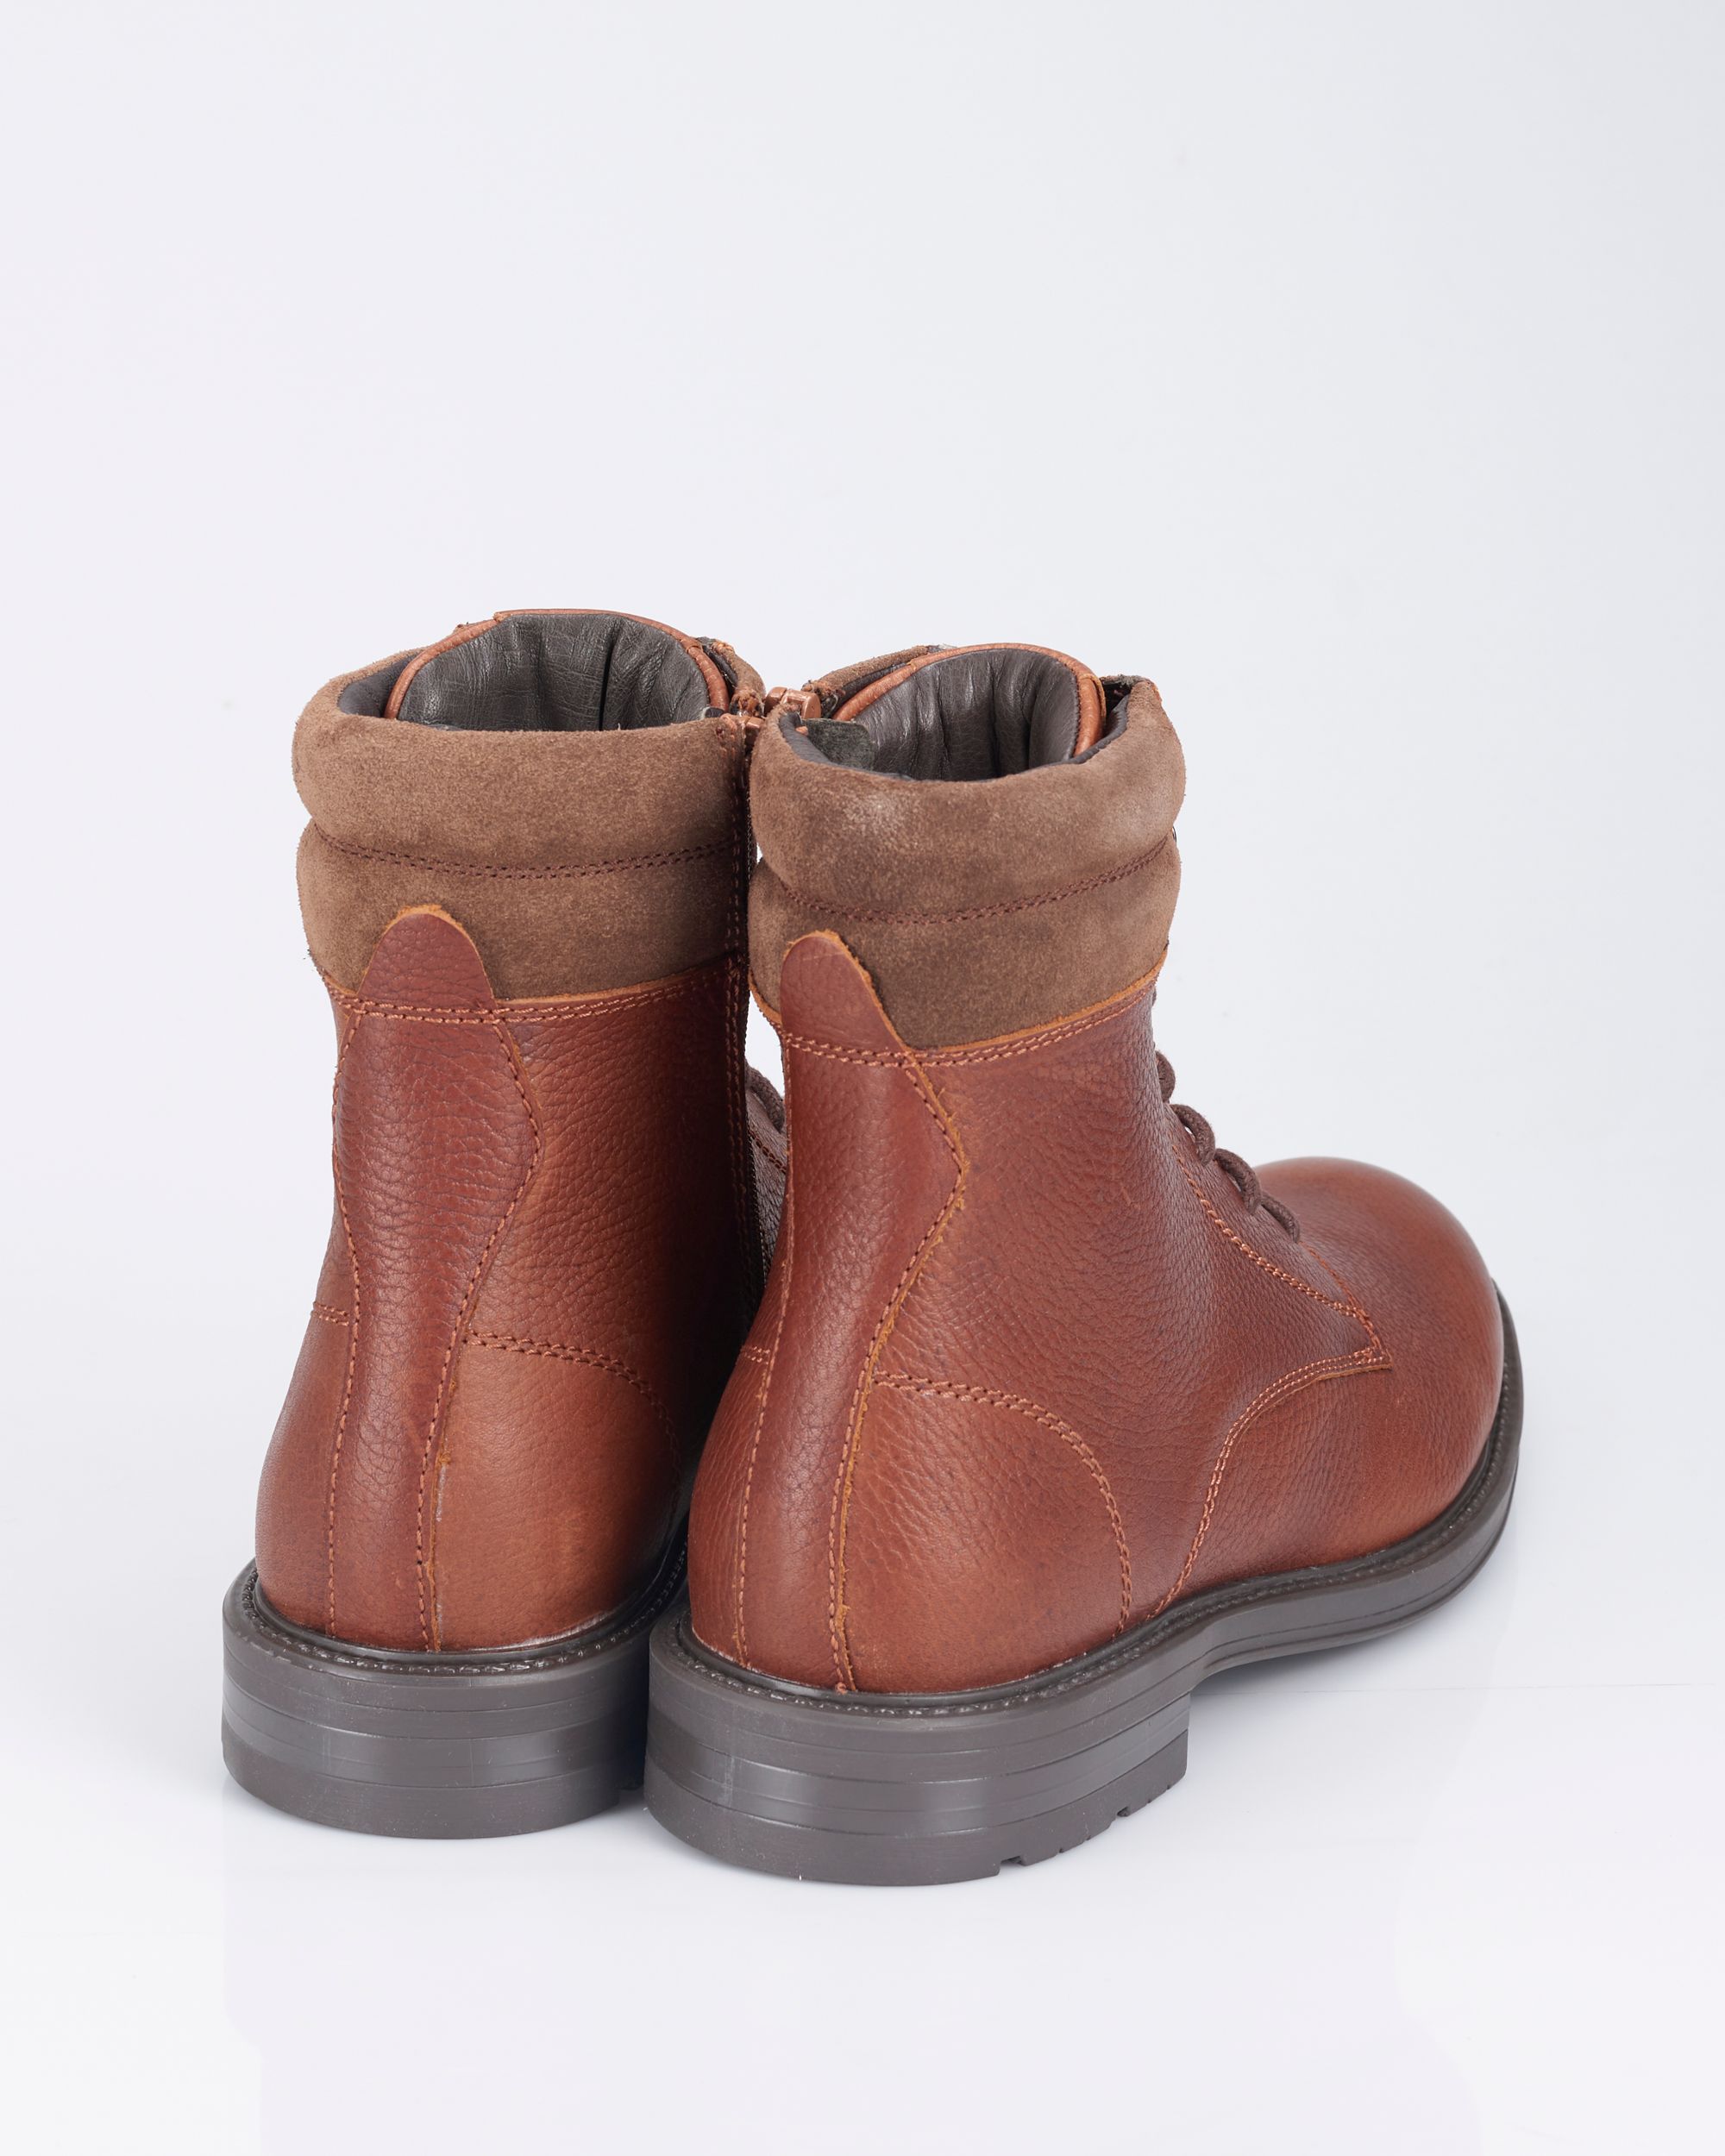 Campbell Classic Boots Chestnut 088302-001-41